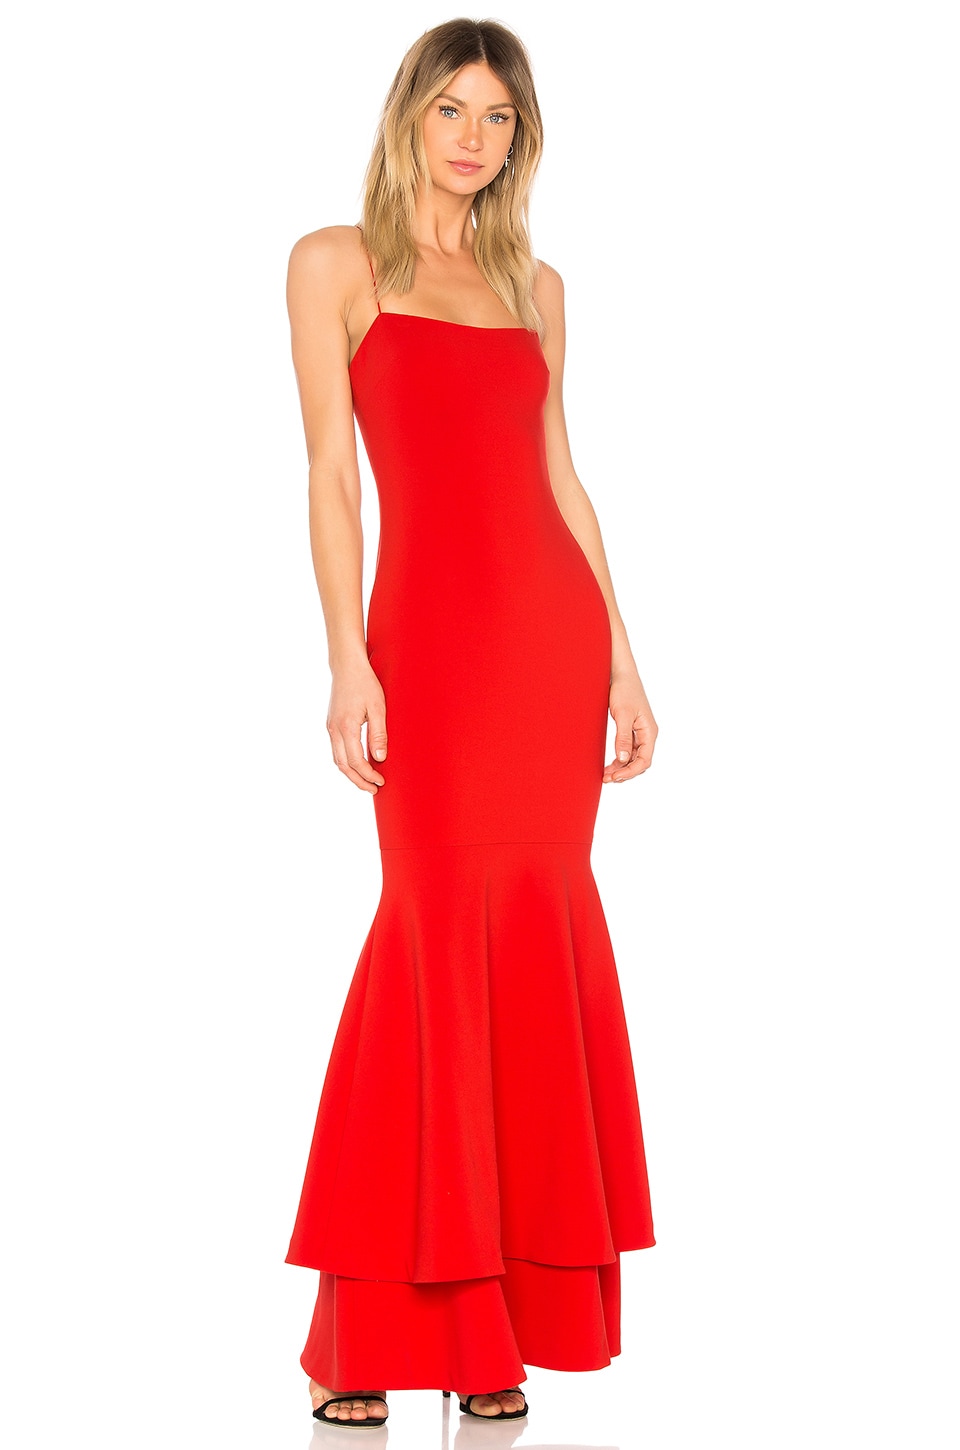 LIKELY Aurora Gown in Scarlet | REVOLVE